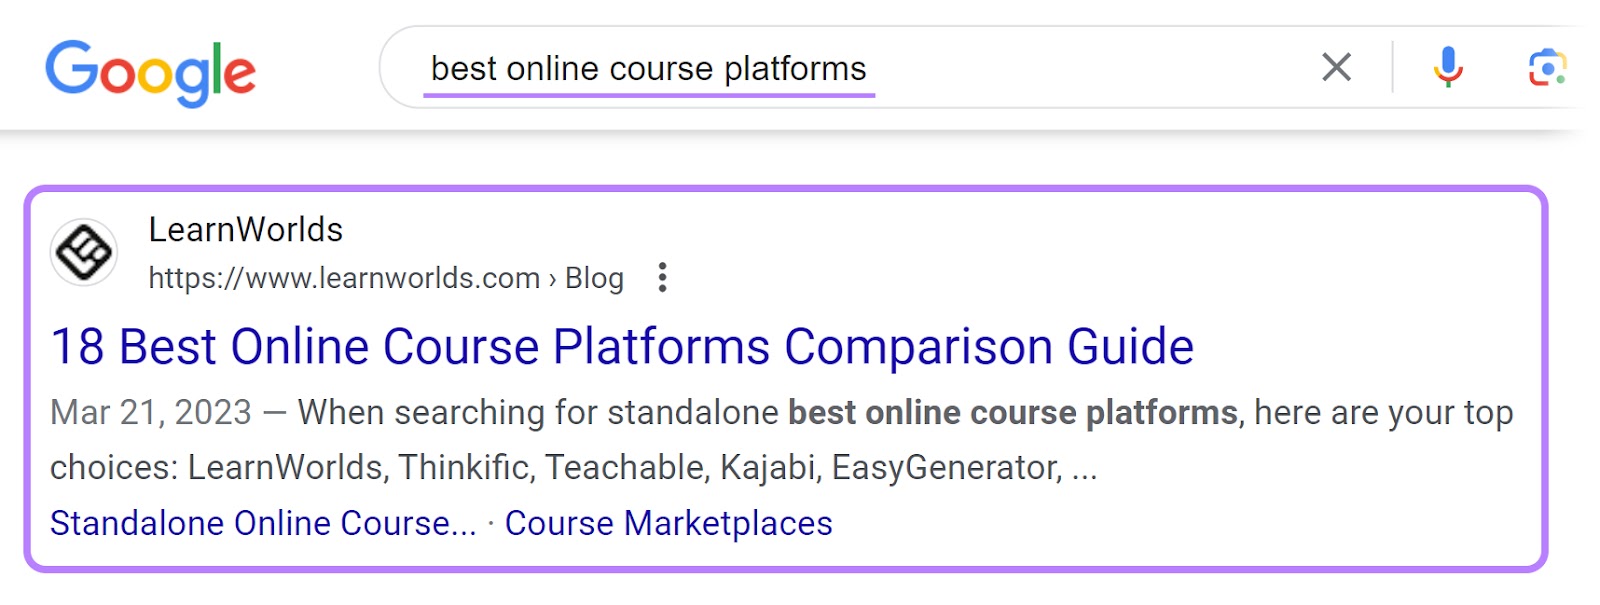 LearnWorld's result on Google SERP for “best online course platforms” query